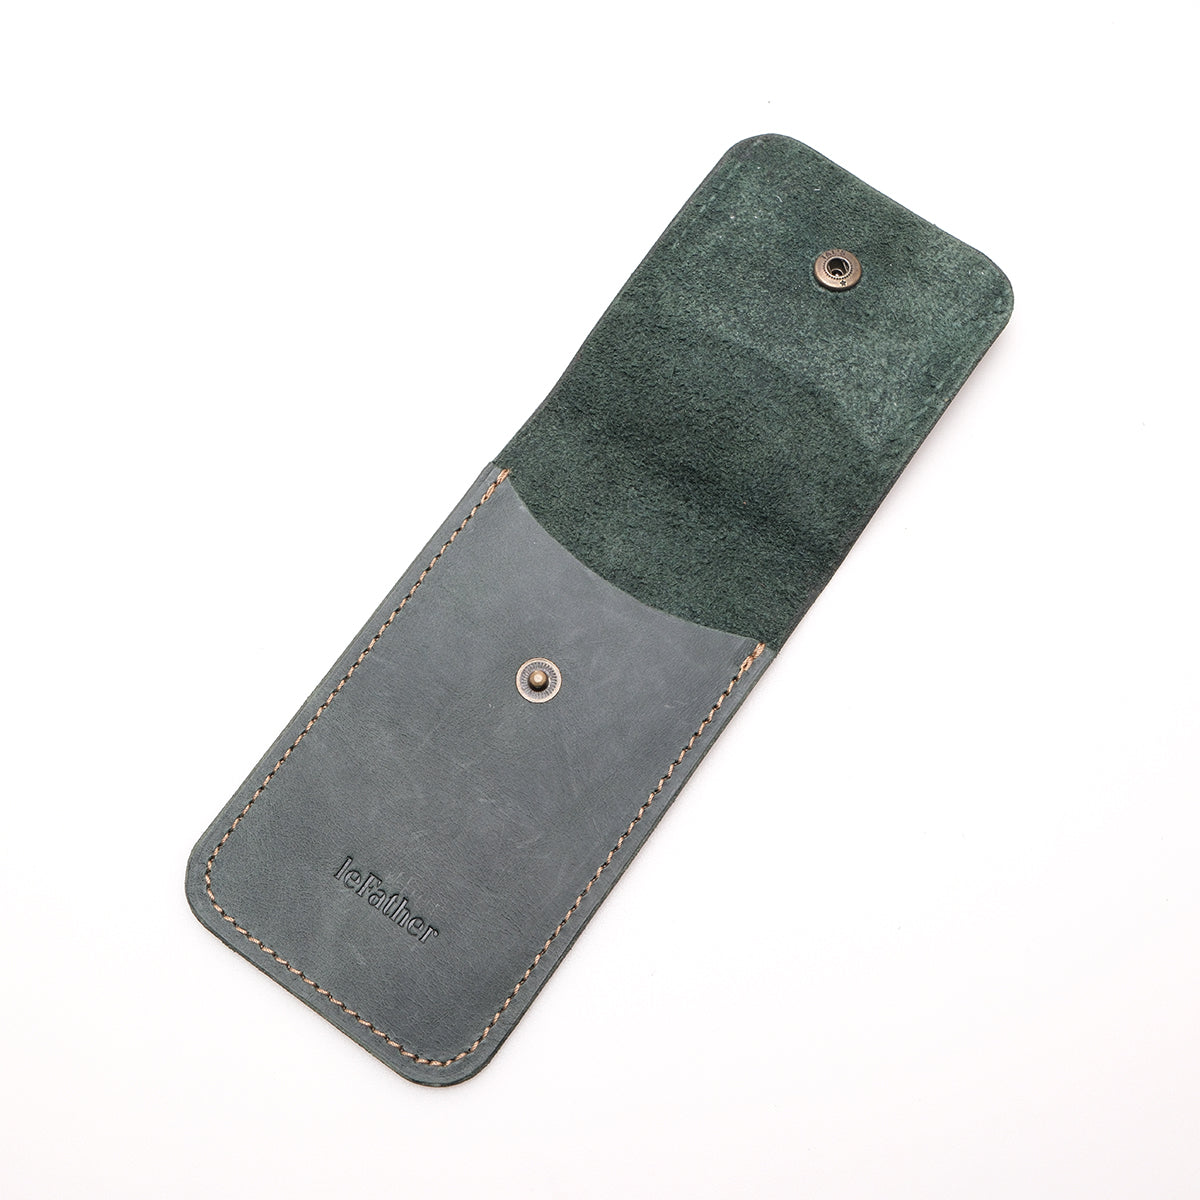 Pencil Case - %100 Genuine Leather This Pencil Case Is Made Of Durable, High Quality Genuine Leather. Only Wholesale! Made In Turkey ✓ Private Label ✓ Custom Design ✓ Contact Us For All Your Questions